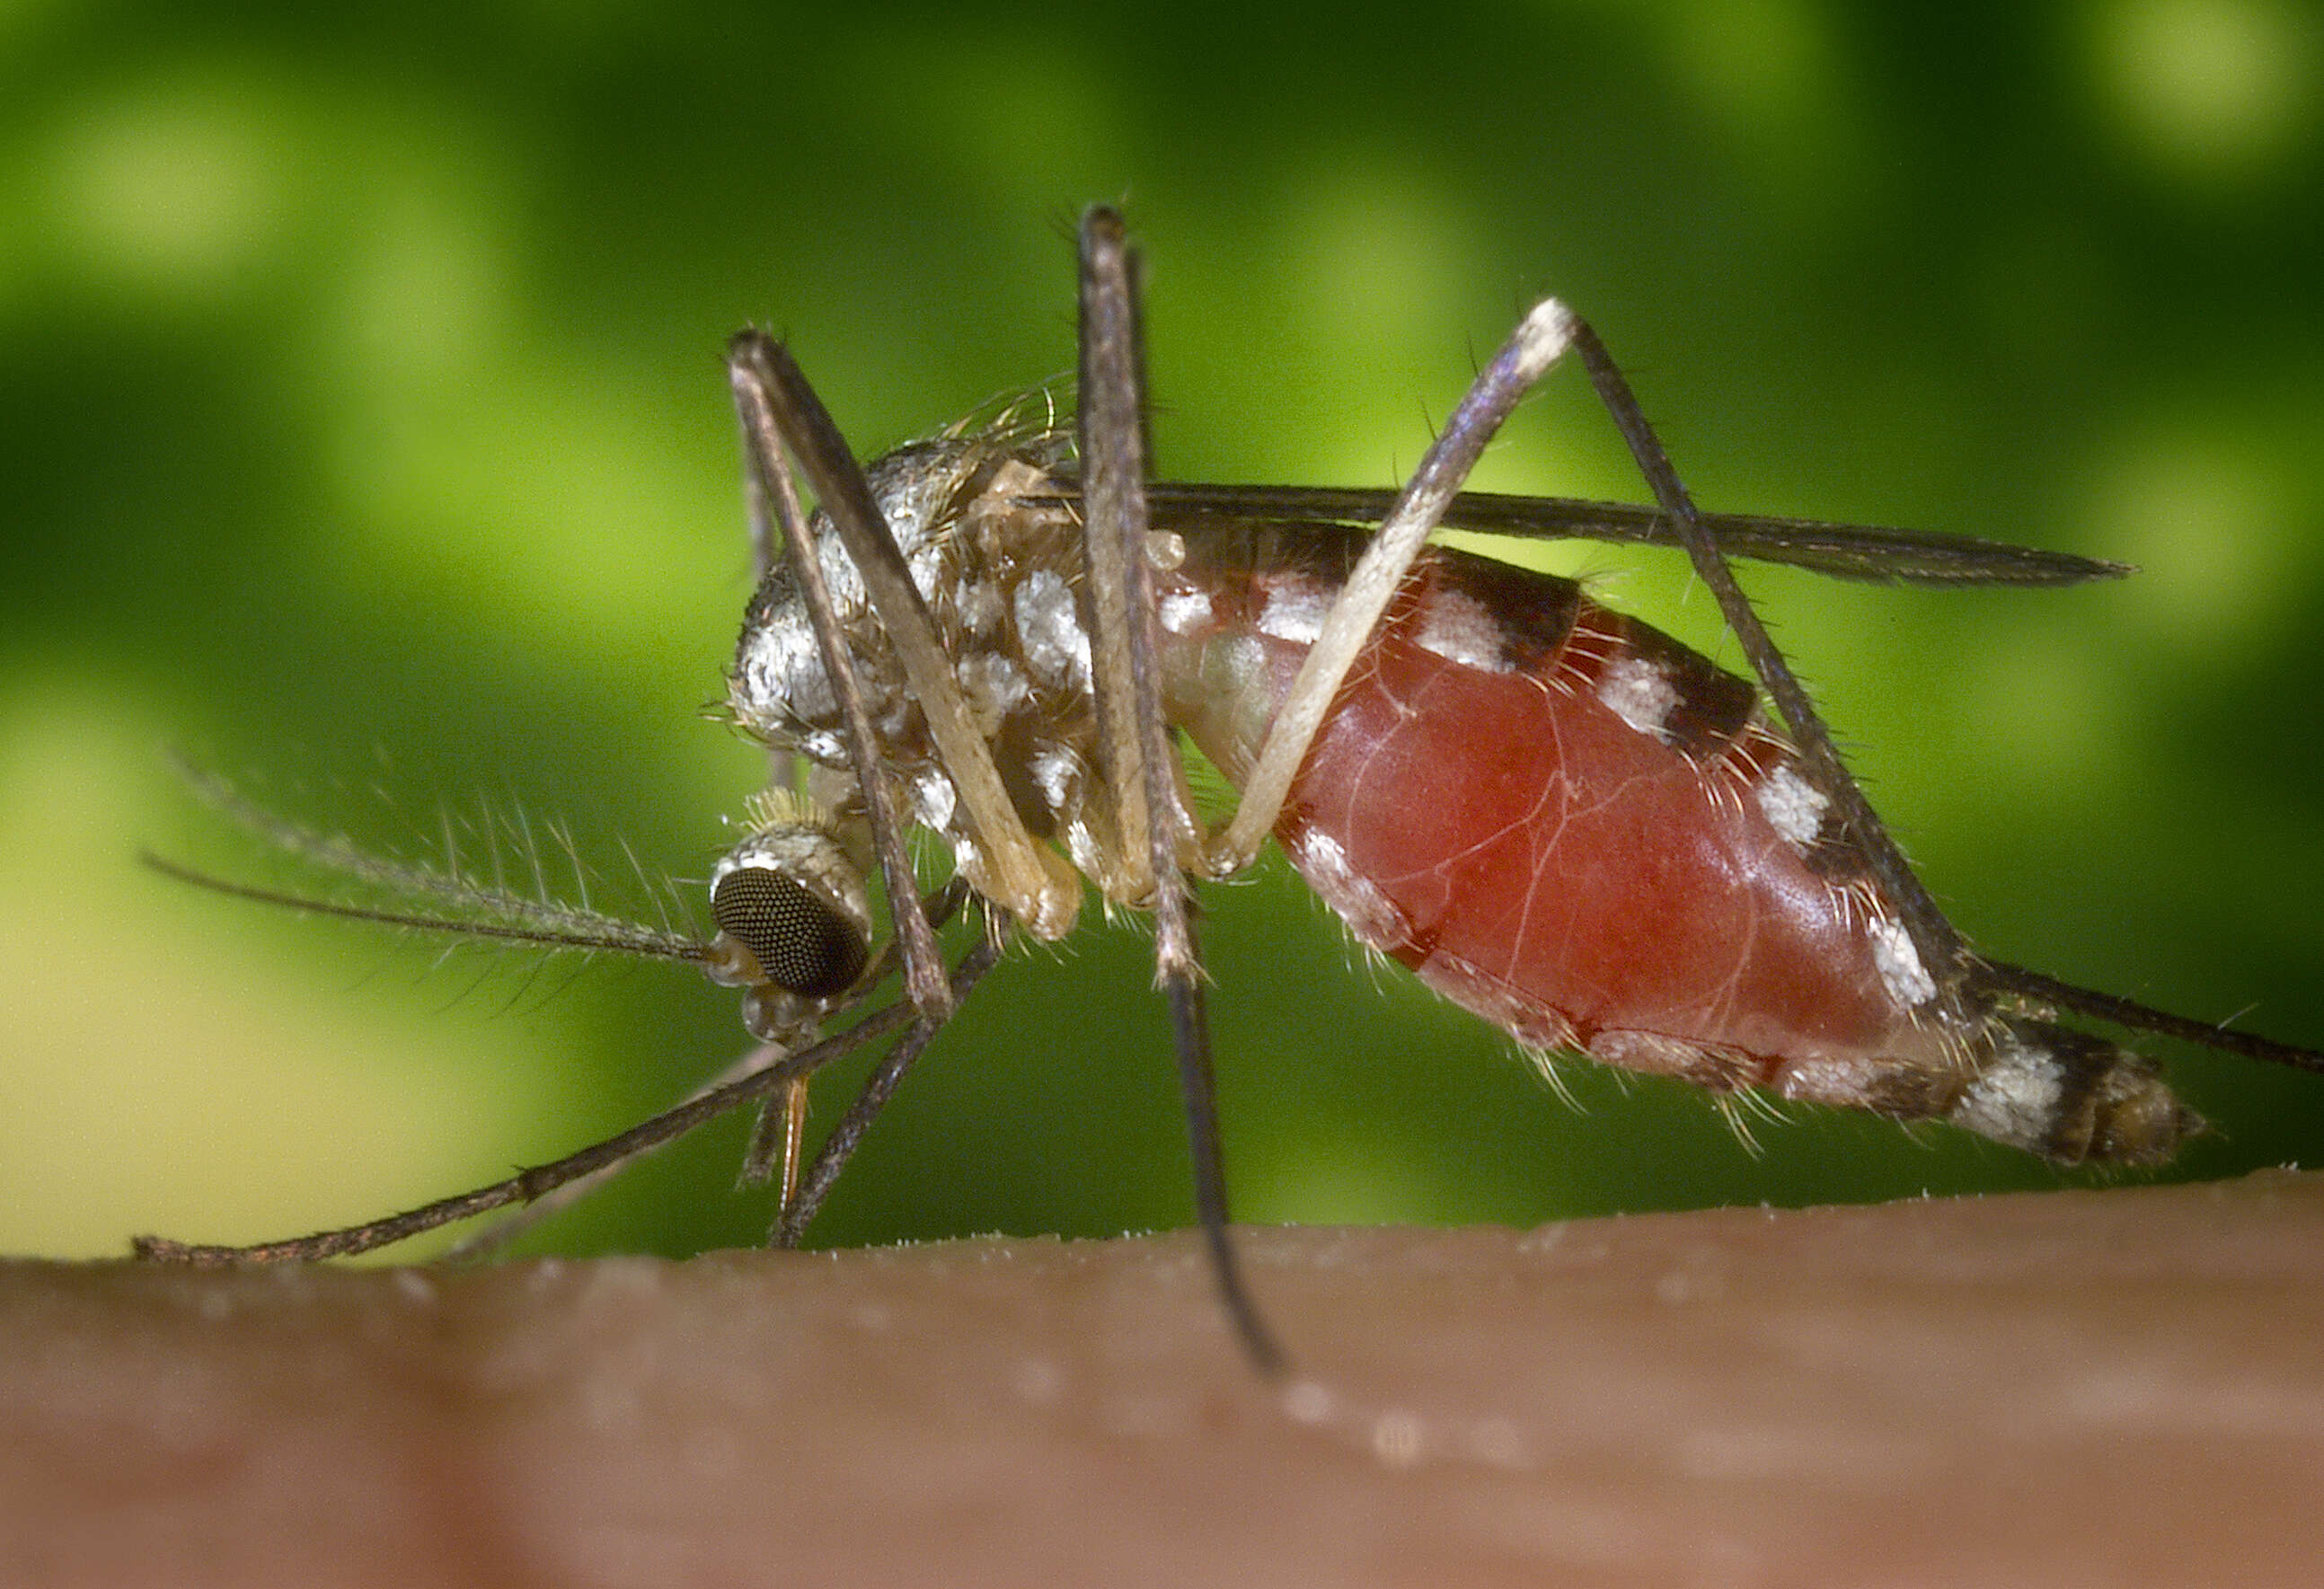 Image of Eastern Treehole Mosquito